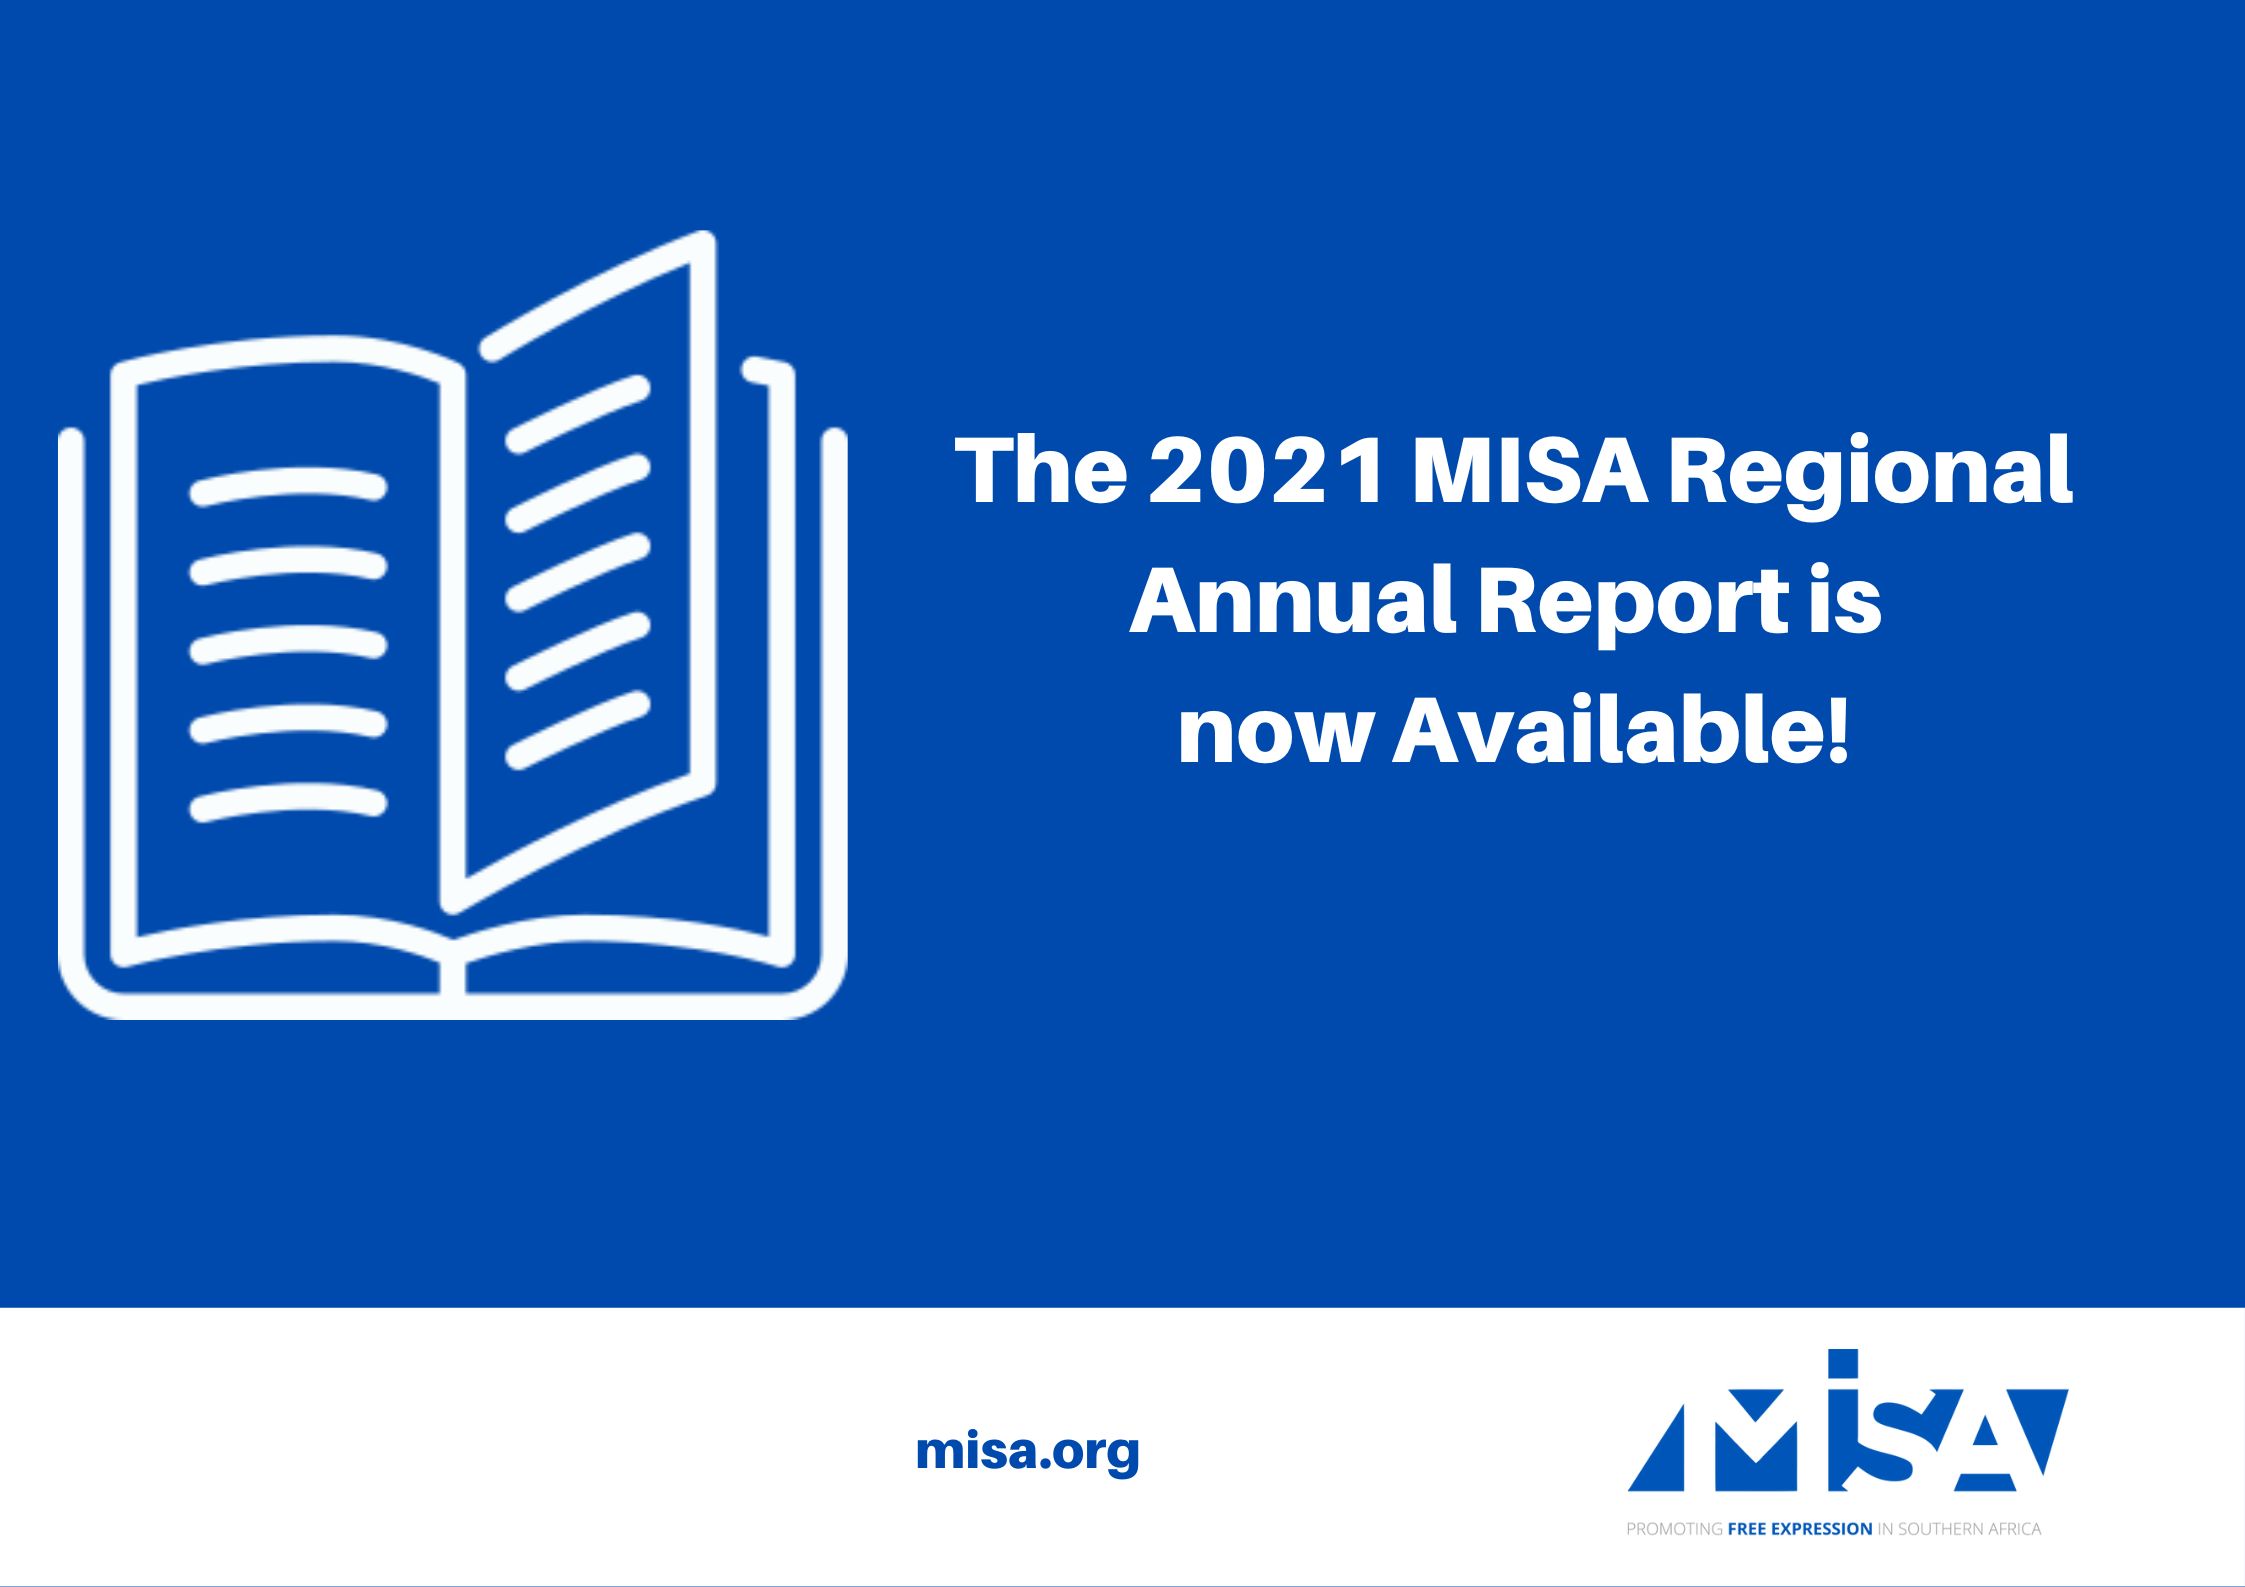 The 2021 MISA Regional Annual Report is now Available!